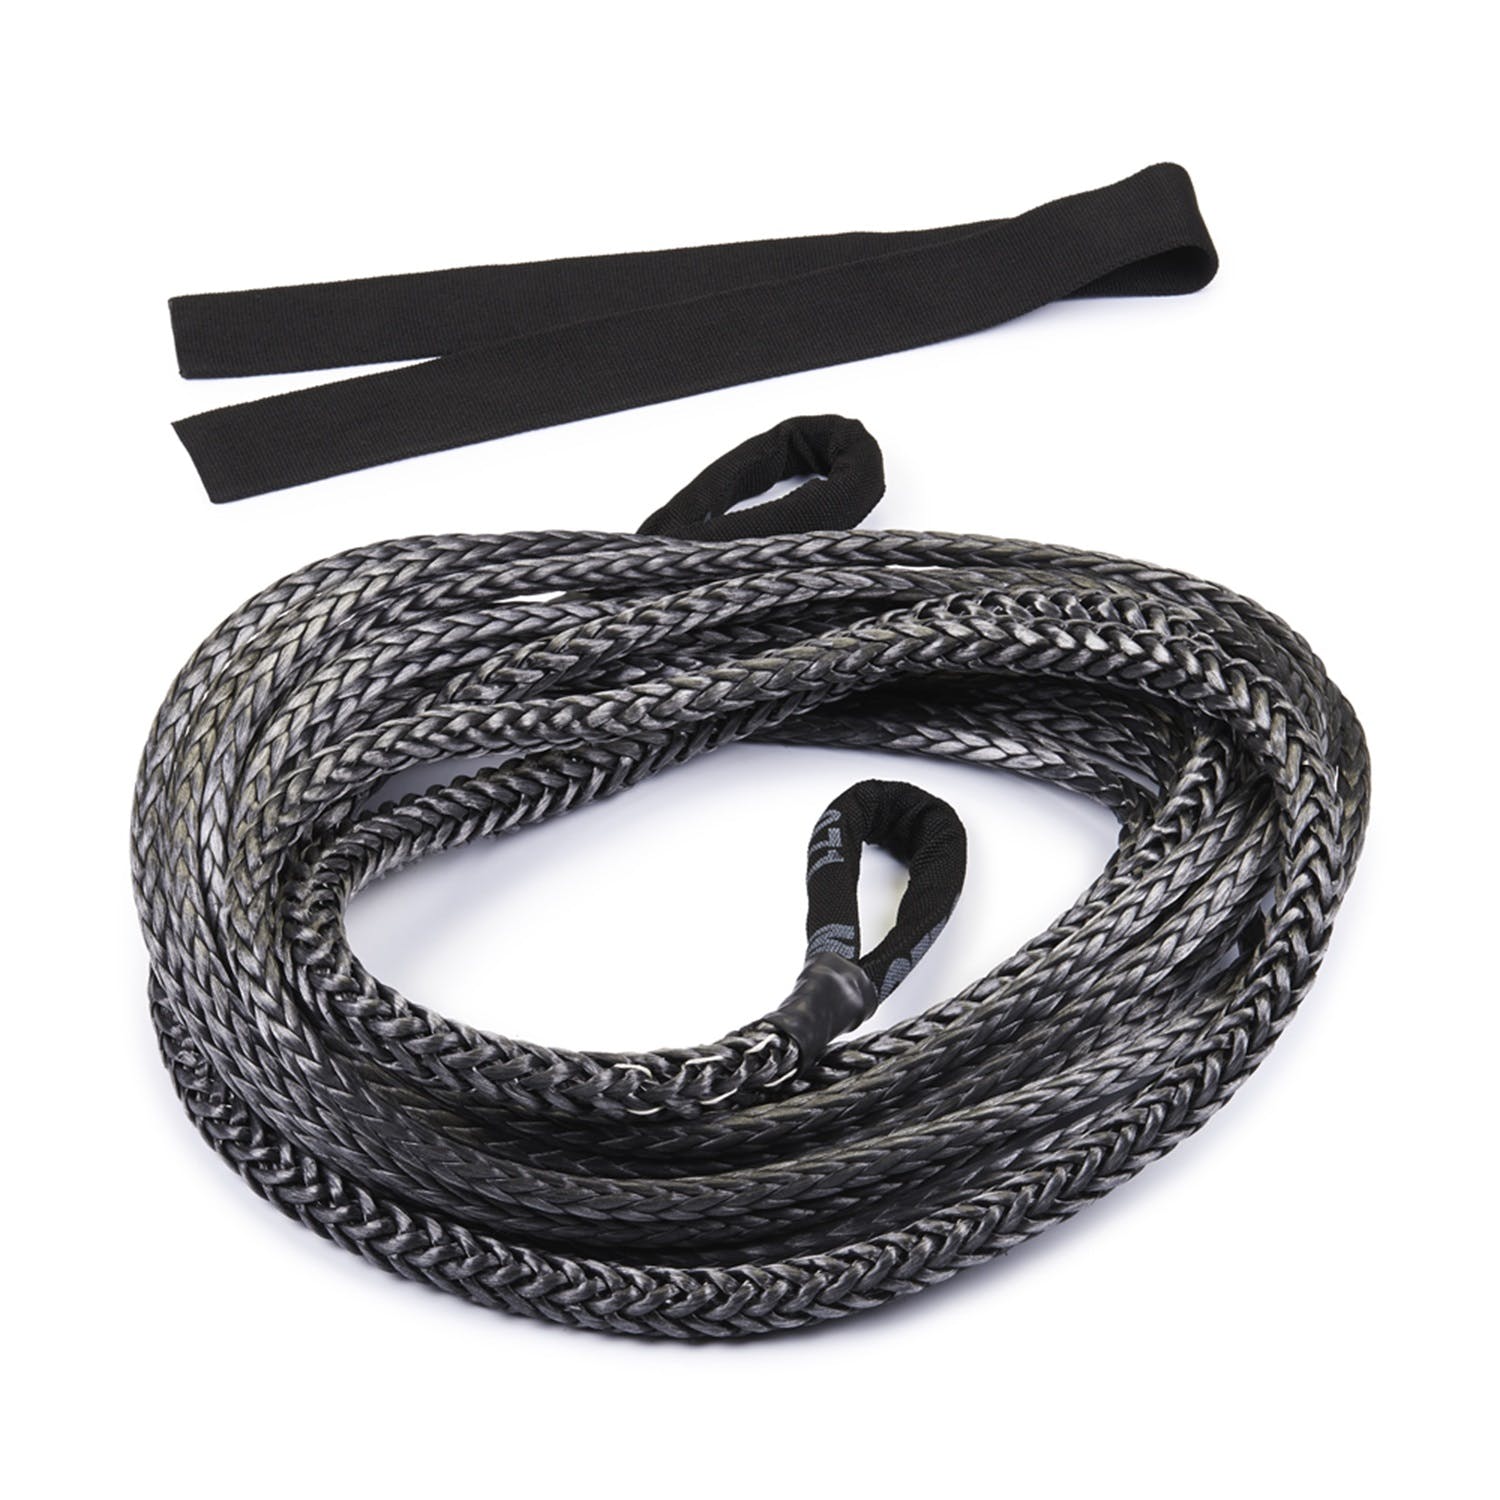 WARN 93326 Standard Duty and Spydura® Synthetic Rope and Extensions